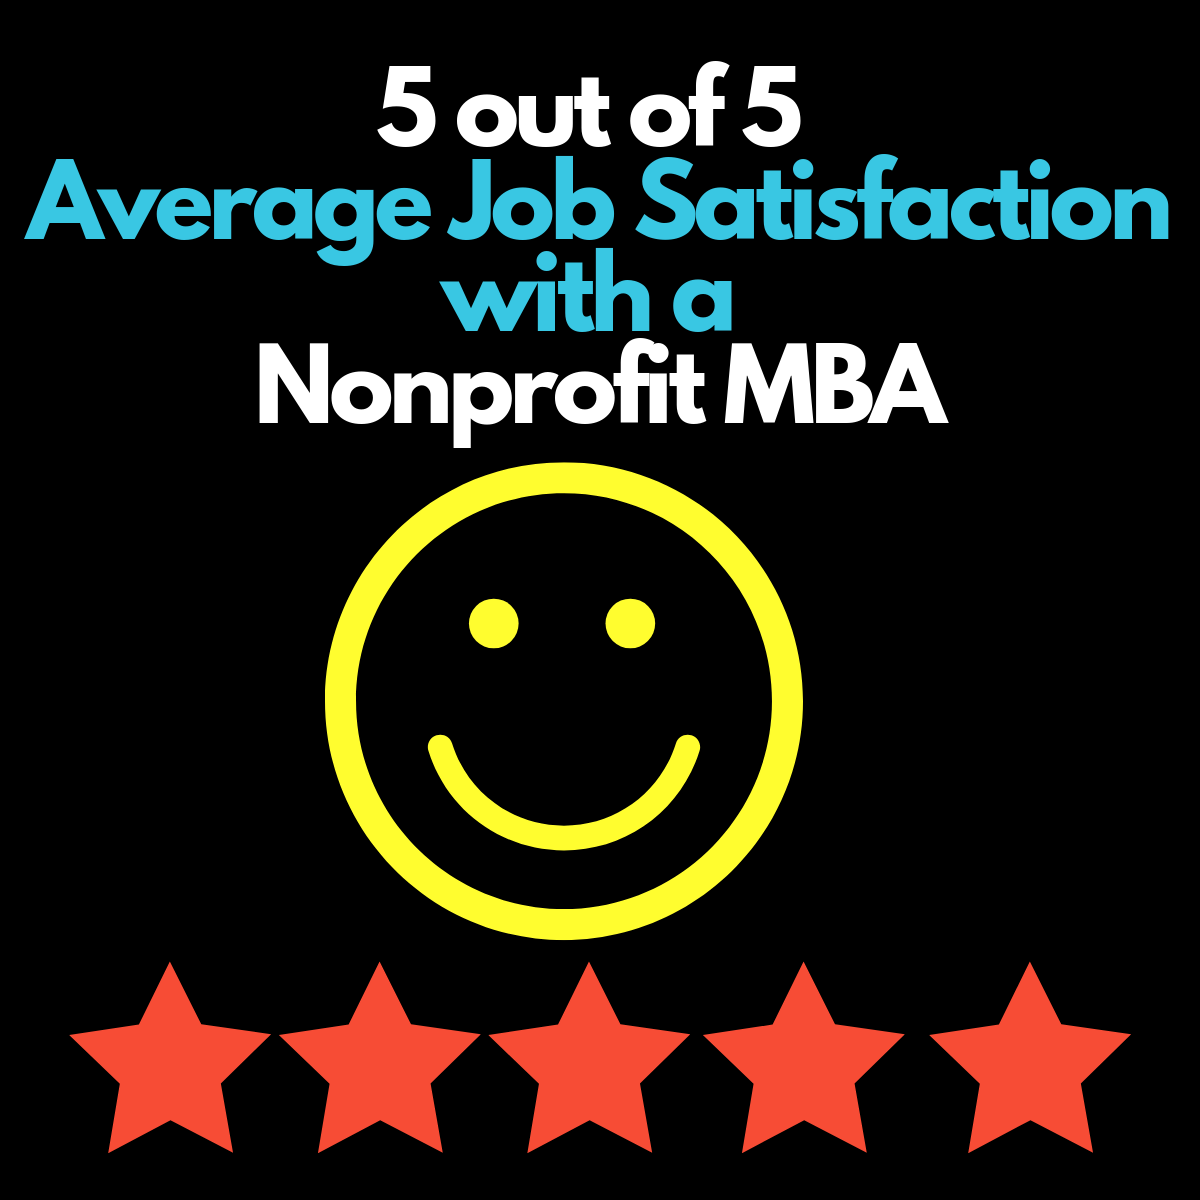 5 out of 5 Average Job Satisfaction with a Nonprofit MBA